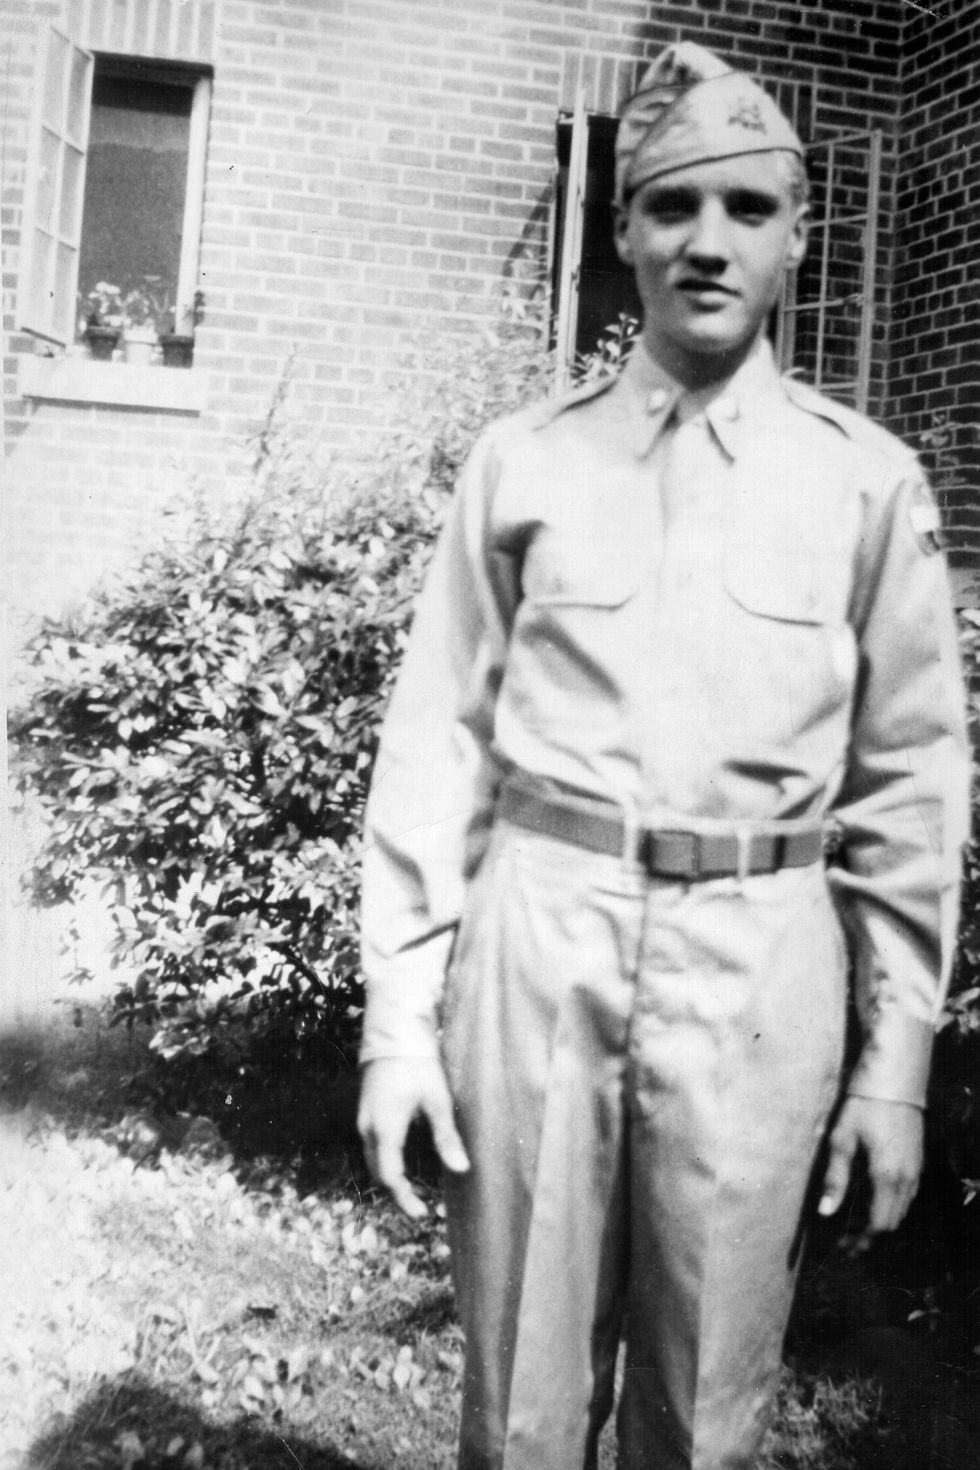 Elvis Presley poses for a portrait wearing his high school army ROTC uniform in 1955 in Memphis, TN.